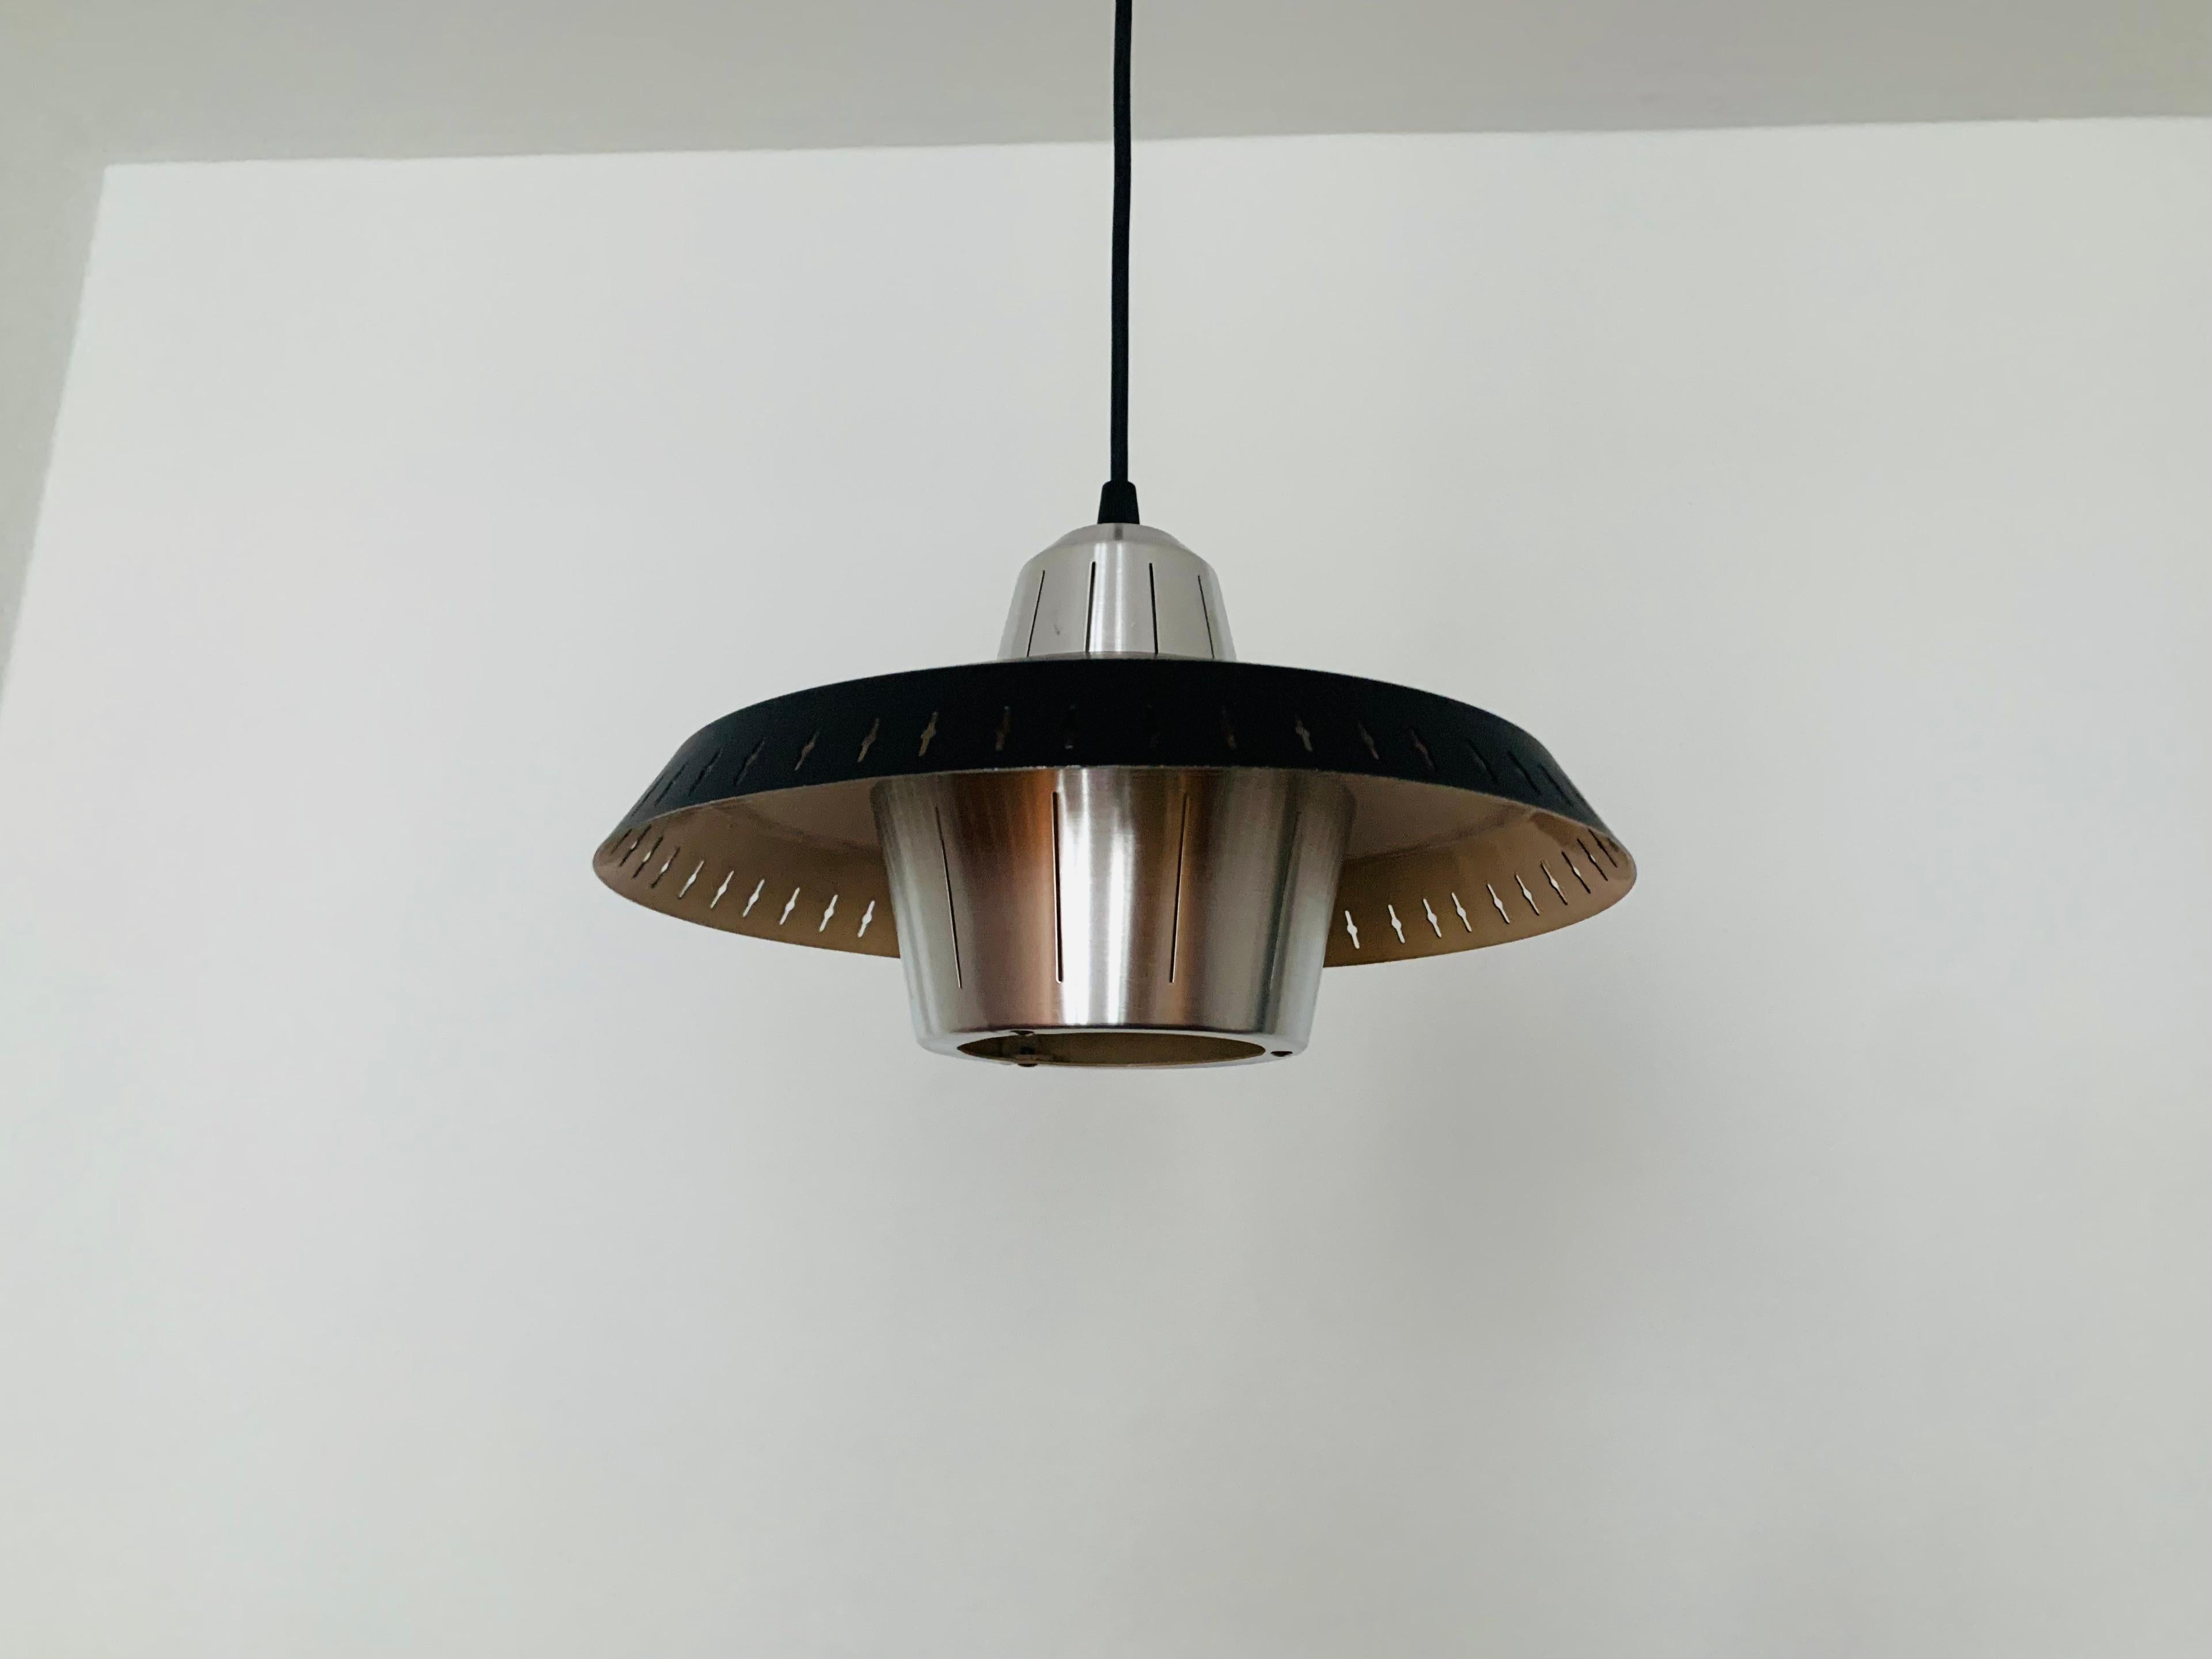 Very beautiful and rare Danish pendant lamp from the 1960s.
The design and the appearance of the lamp is particularly beautiful.
The shape creates a wonderful light.

Condition:

Very good vintage condition with slight signs of wear consistent